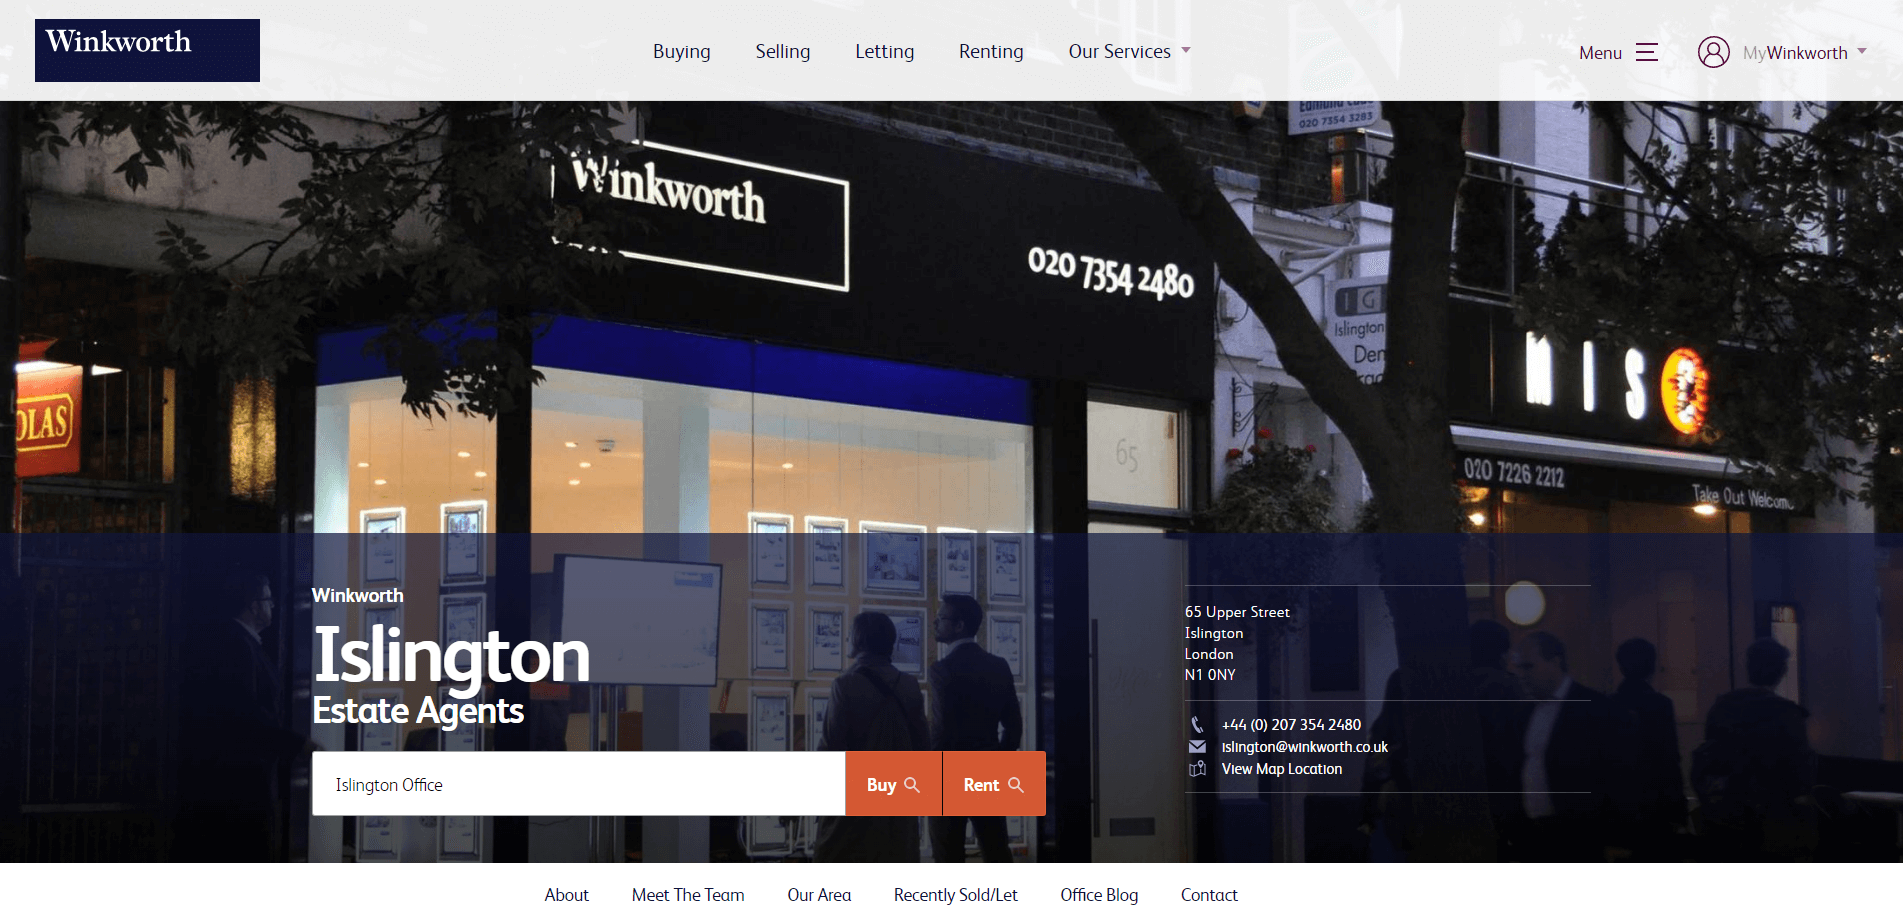  WOW!  Here are 101 of the best real estate websites.  Here's winkworth.co.uk.  Want to see who made the list? 